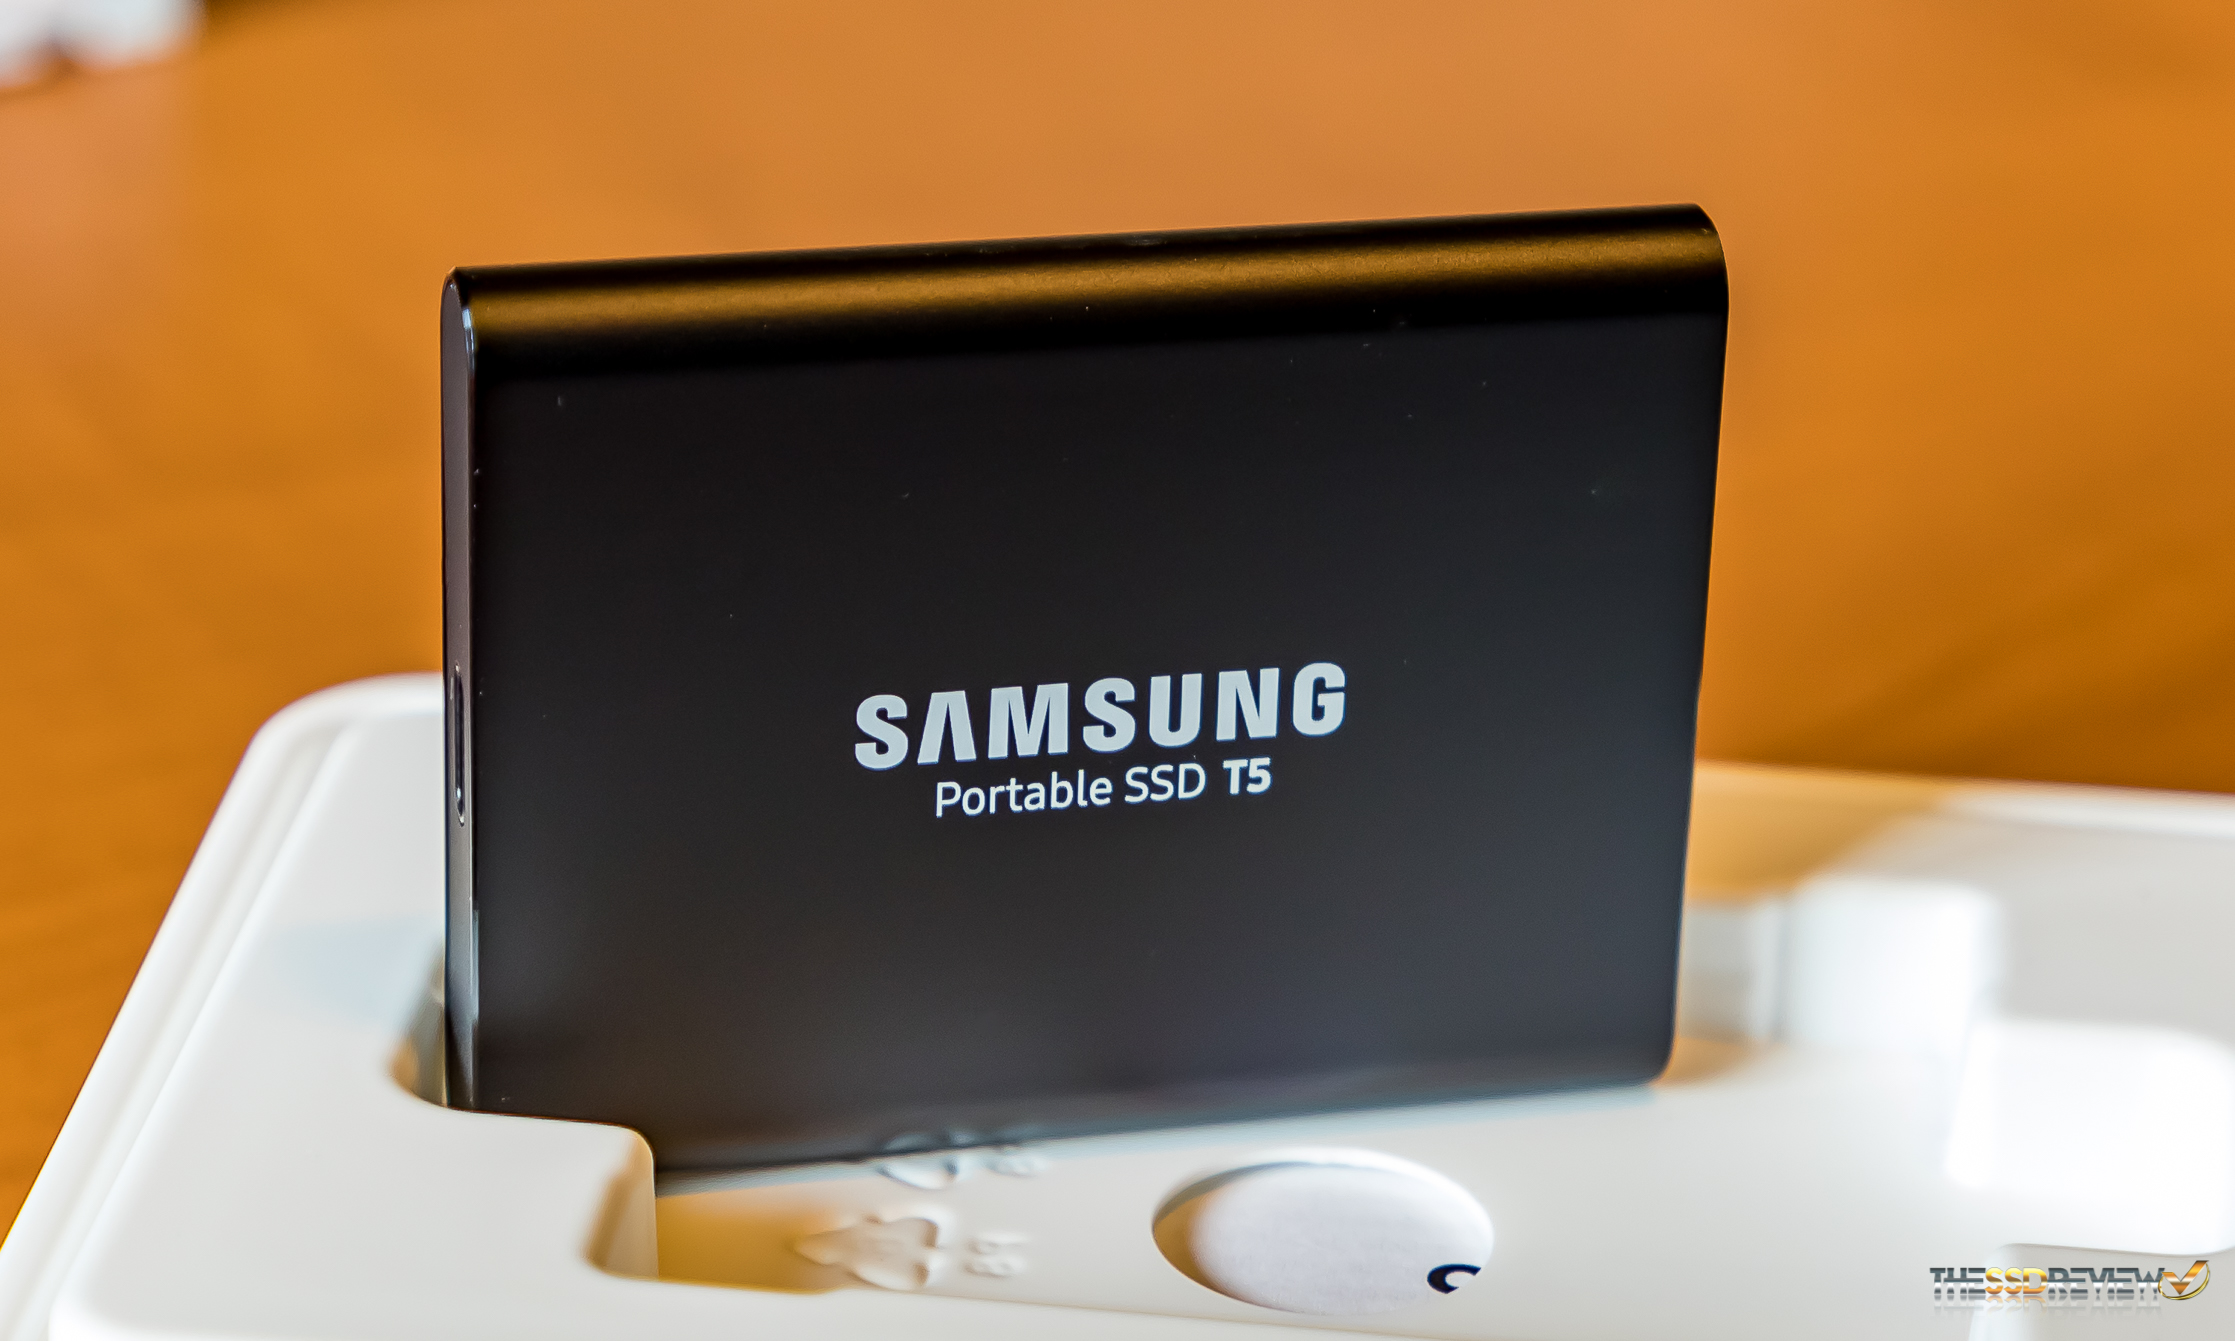 Samsung Portable SSD Review (500GB/2TB) - The Industry Standard | The SSD Review